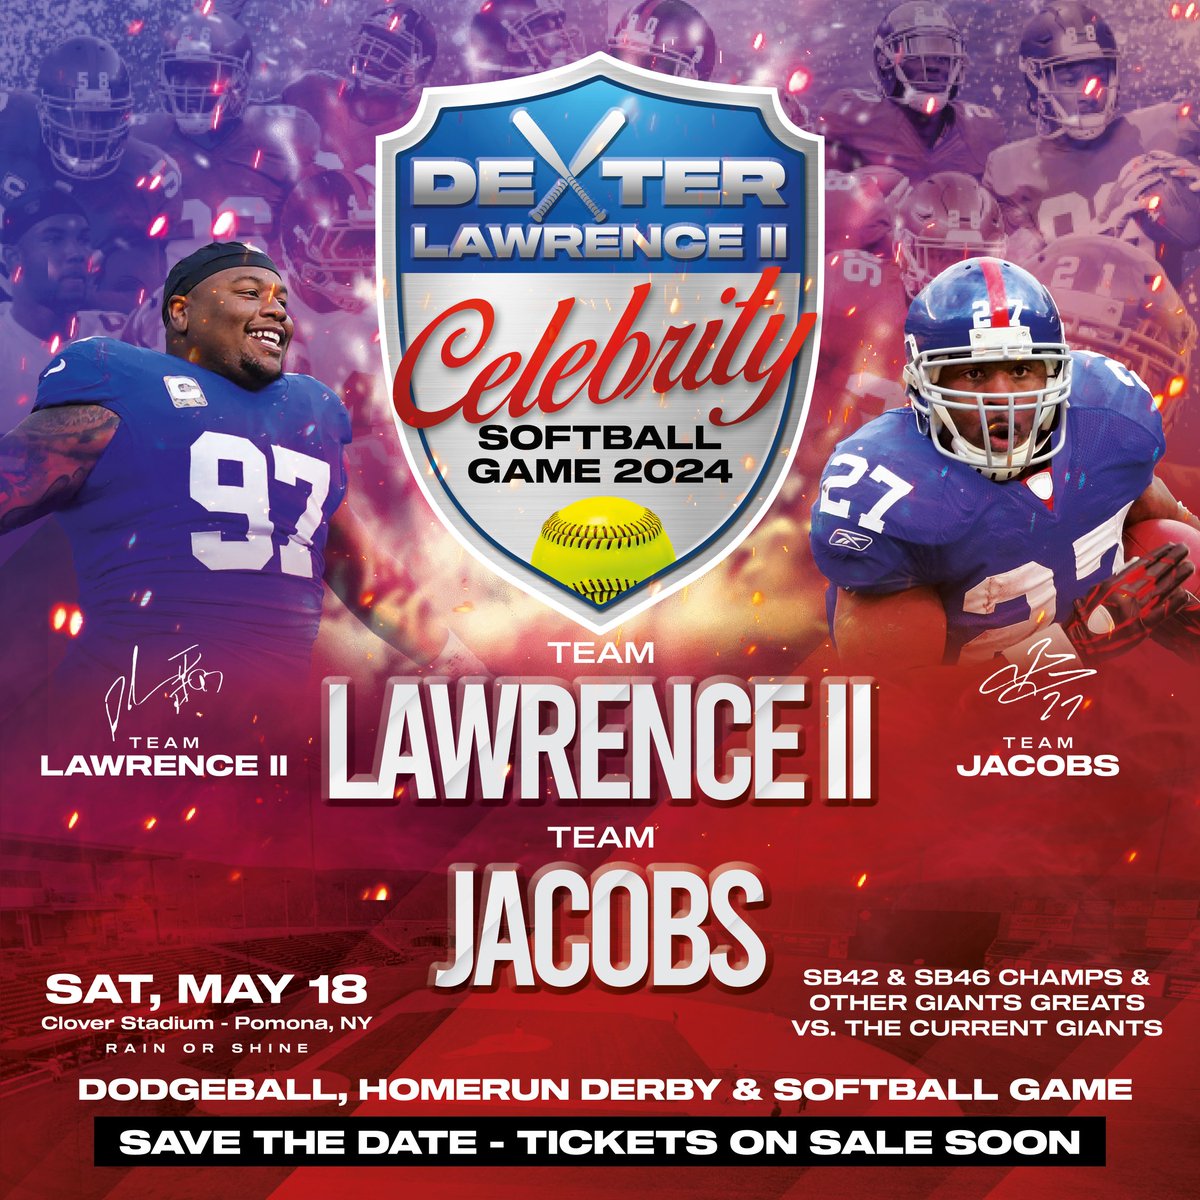 SAVE THE DATE: Dexter Lawrence II celebrity 🥎 game 5/18/24. @BrandonJacobs27 & his SB 42&46 teams & other NYG greats vs @llawrencesexy & the current Giants in dodgeball, homerun derby & softball. Tix on sale soon Interested in Sponsorship/Vendors table contact: Lpgnyg@gmail.com